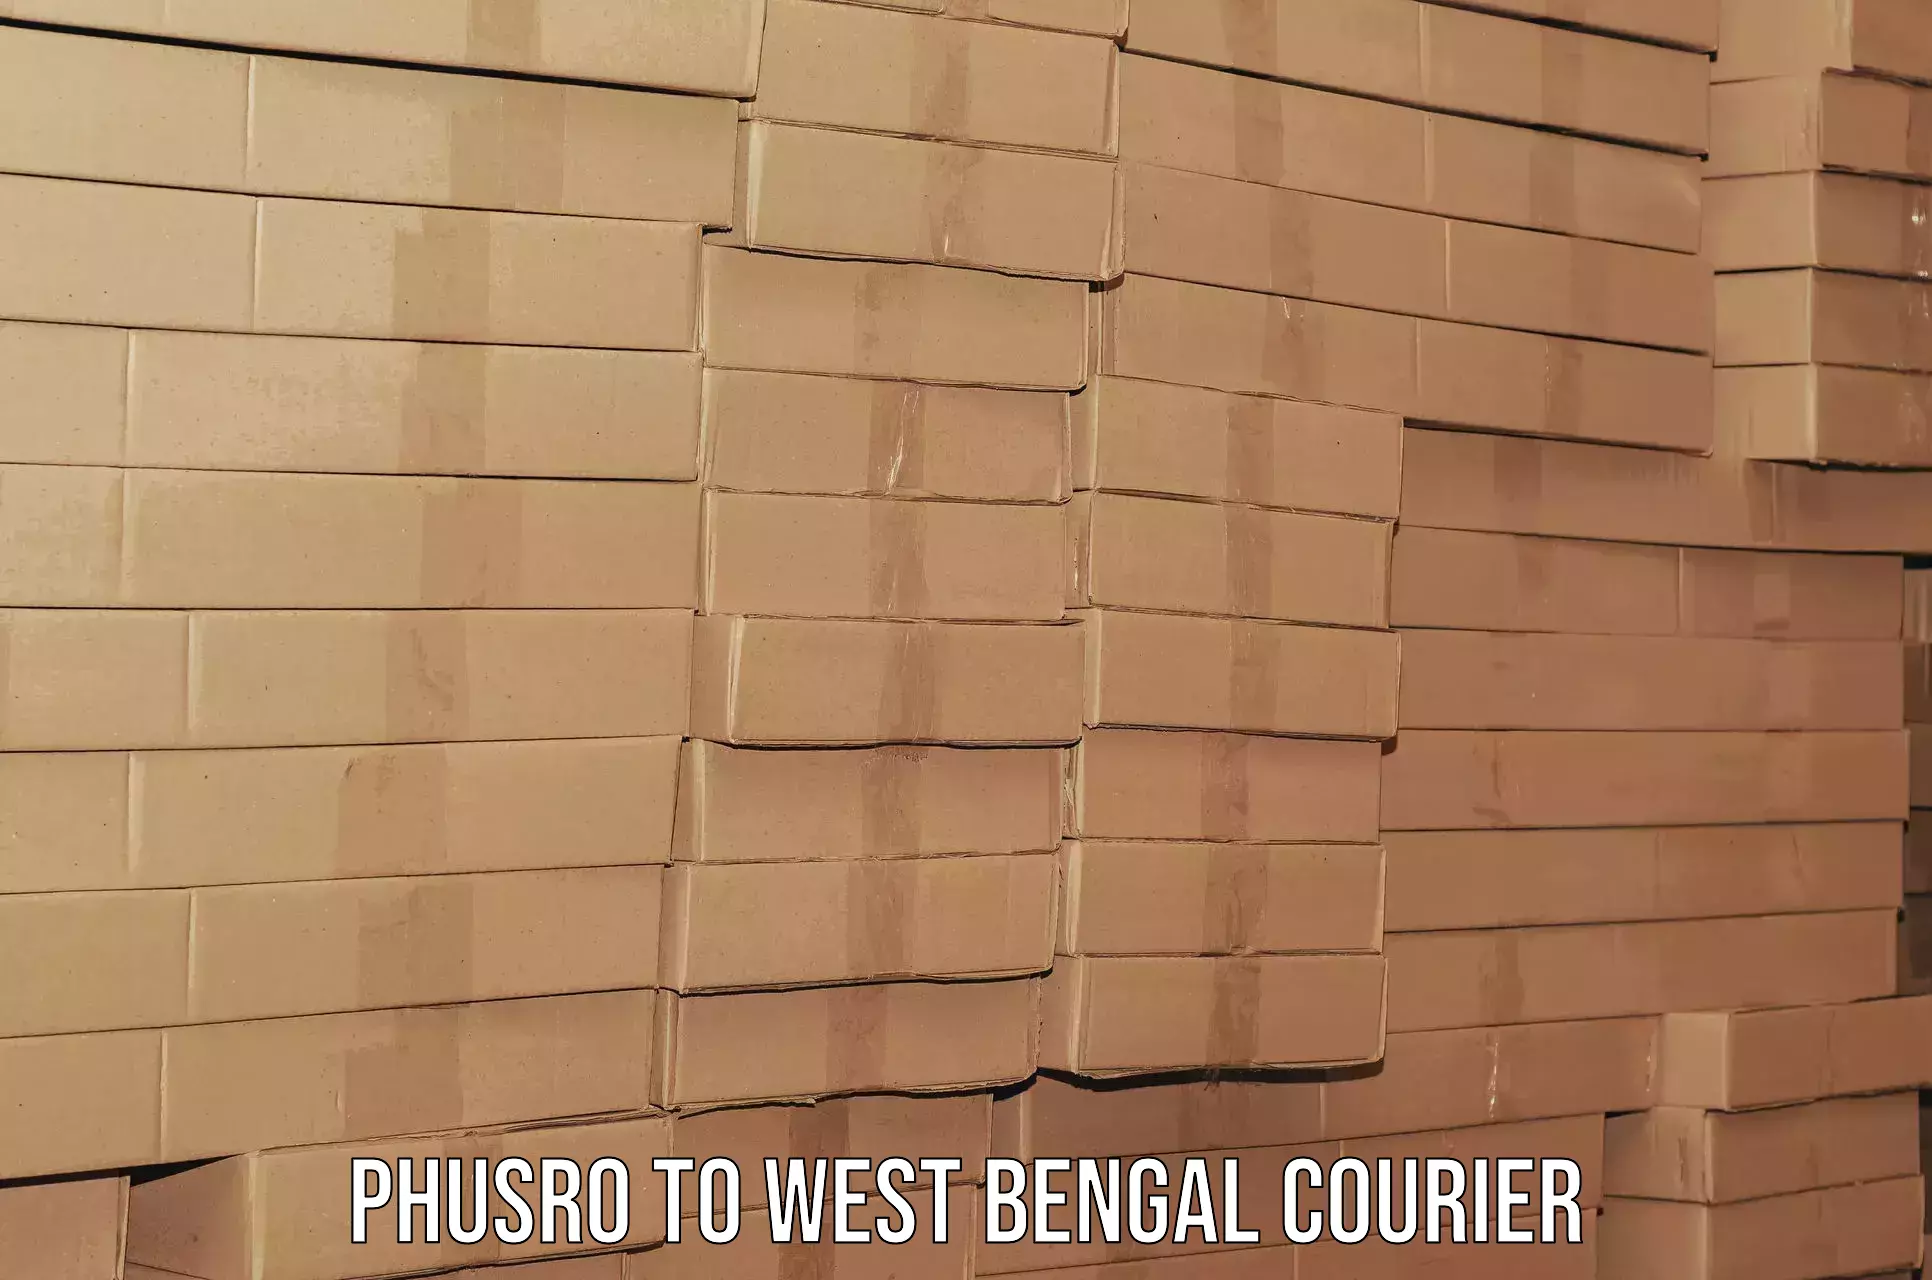 Hassle-free relocation in Phusro to West Bengal